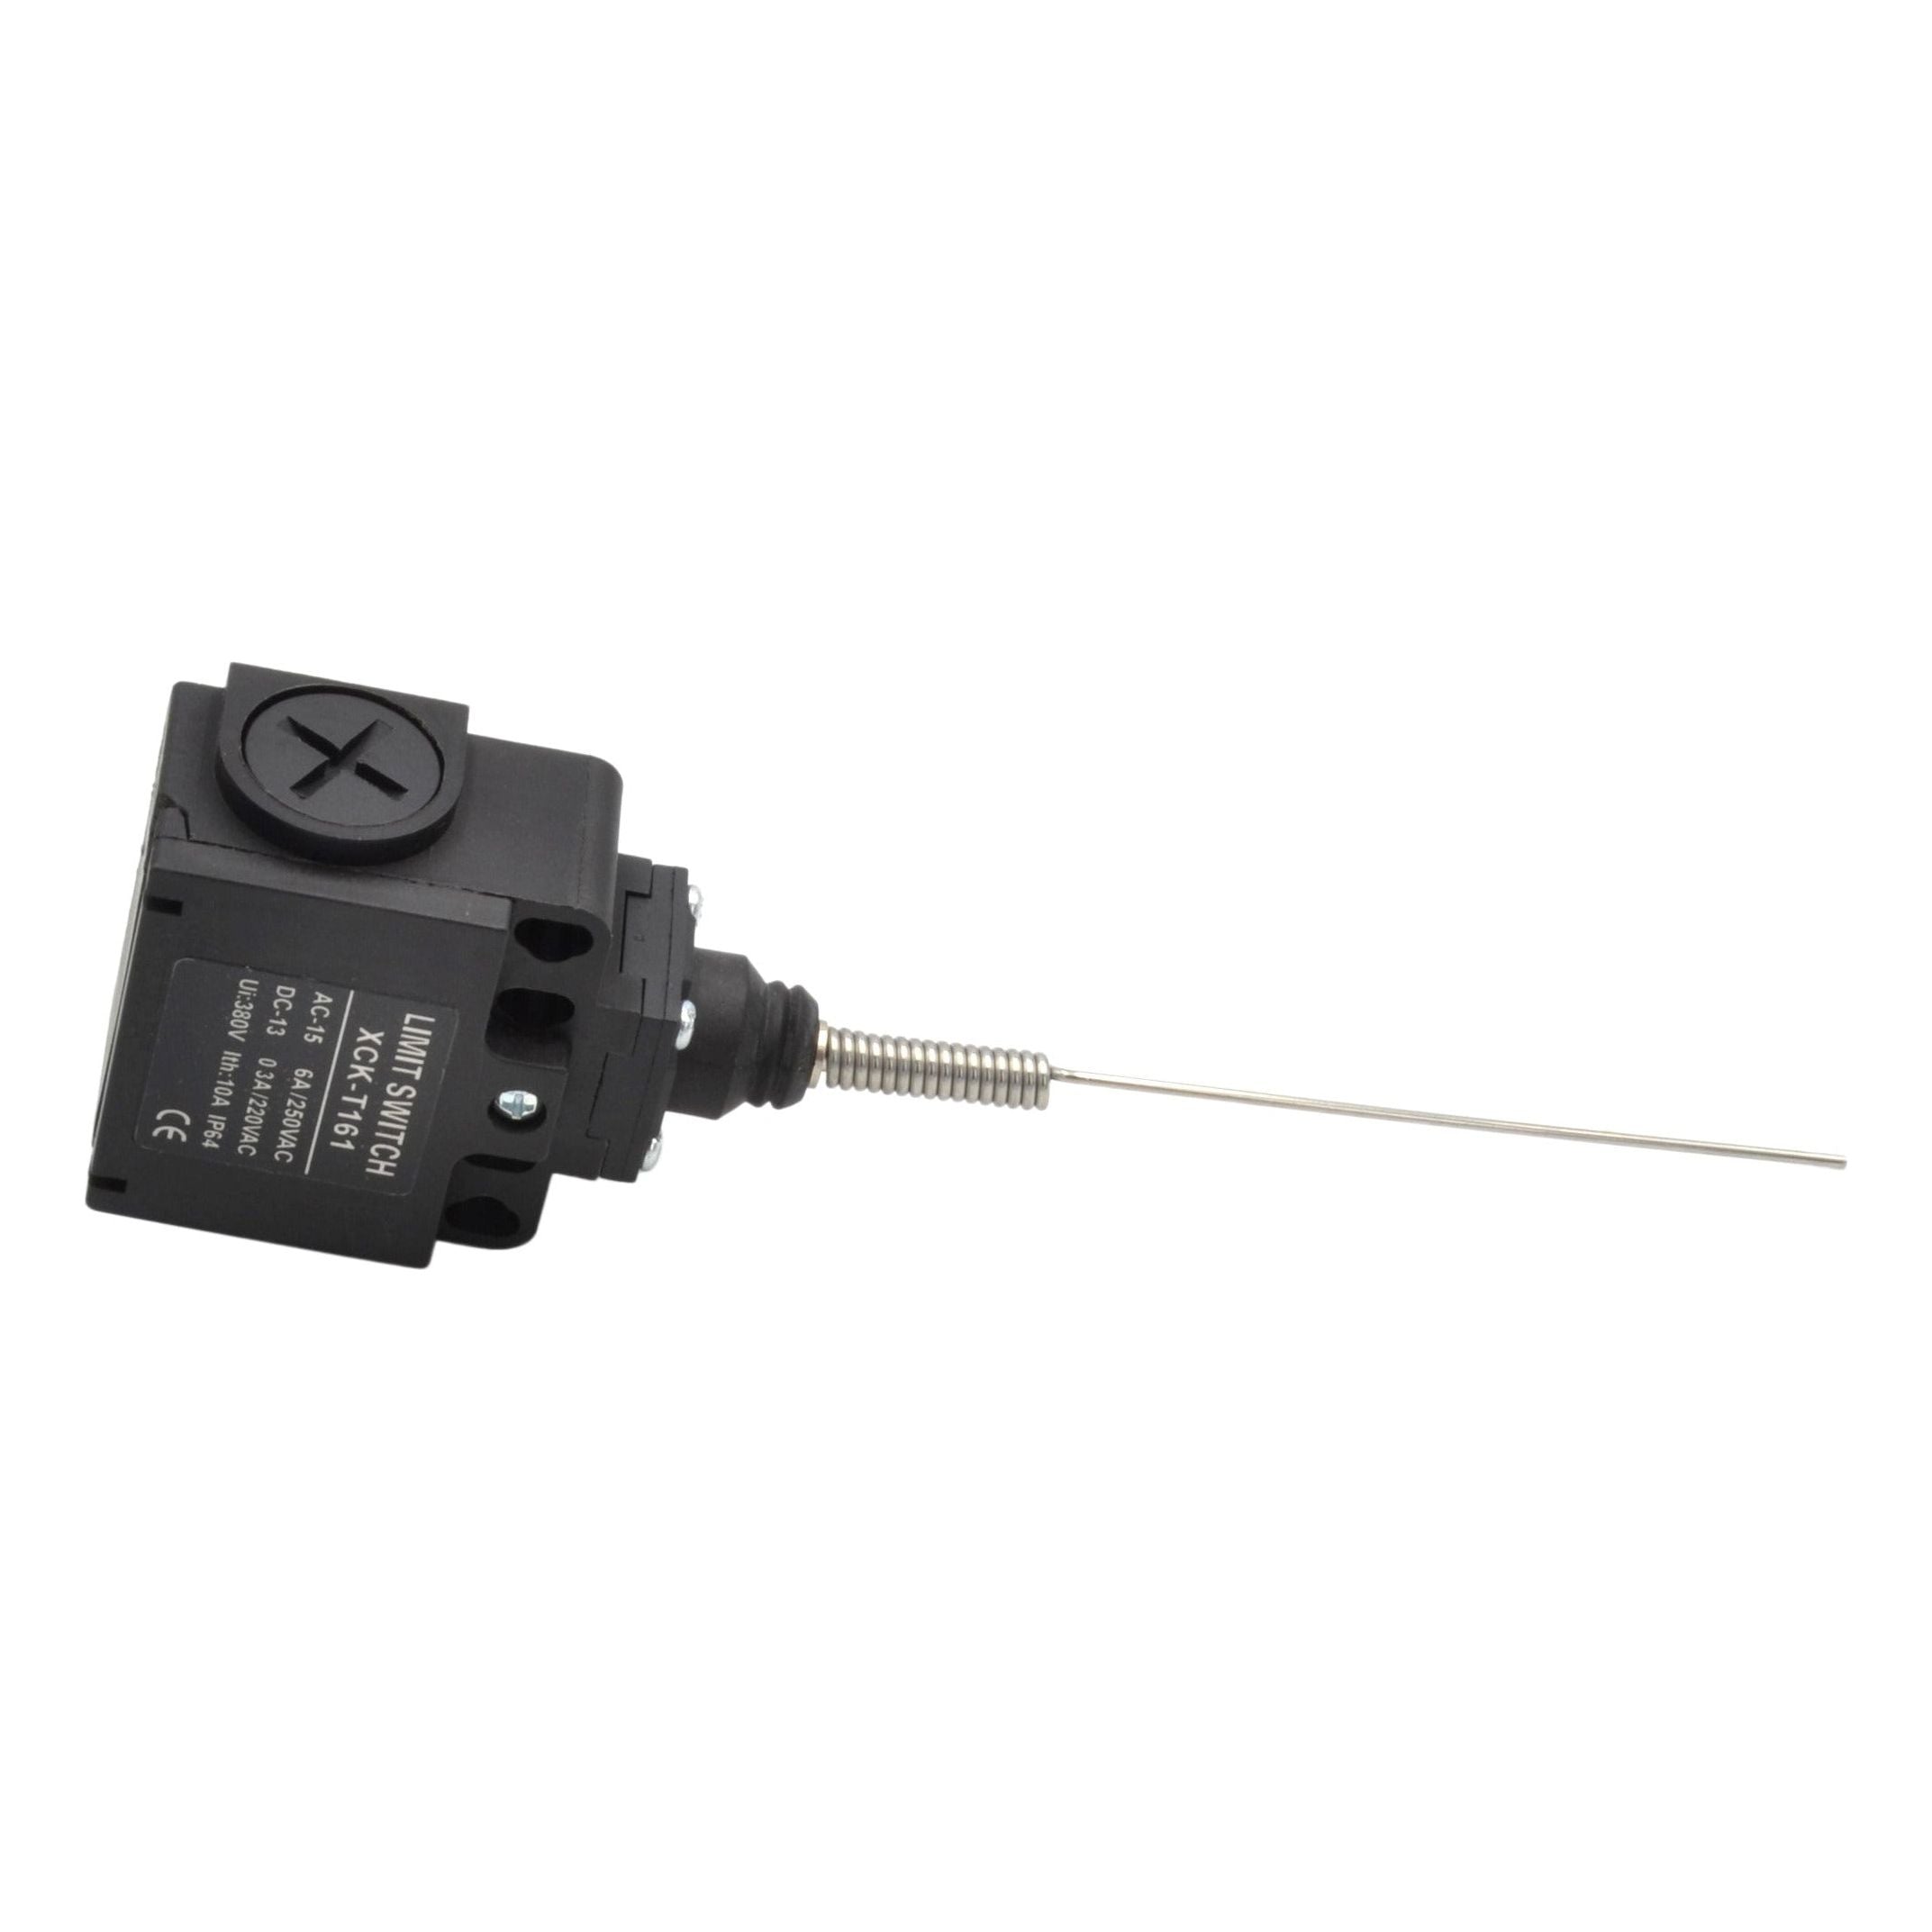 XCK-T161 Coiled Spring Contact Rod Actuator Limit Switch